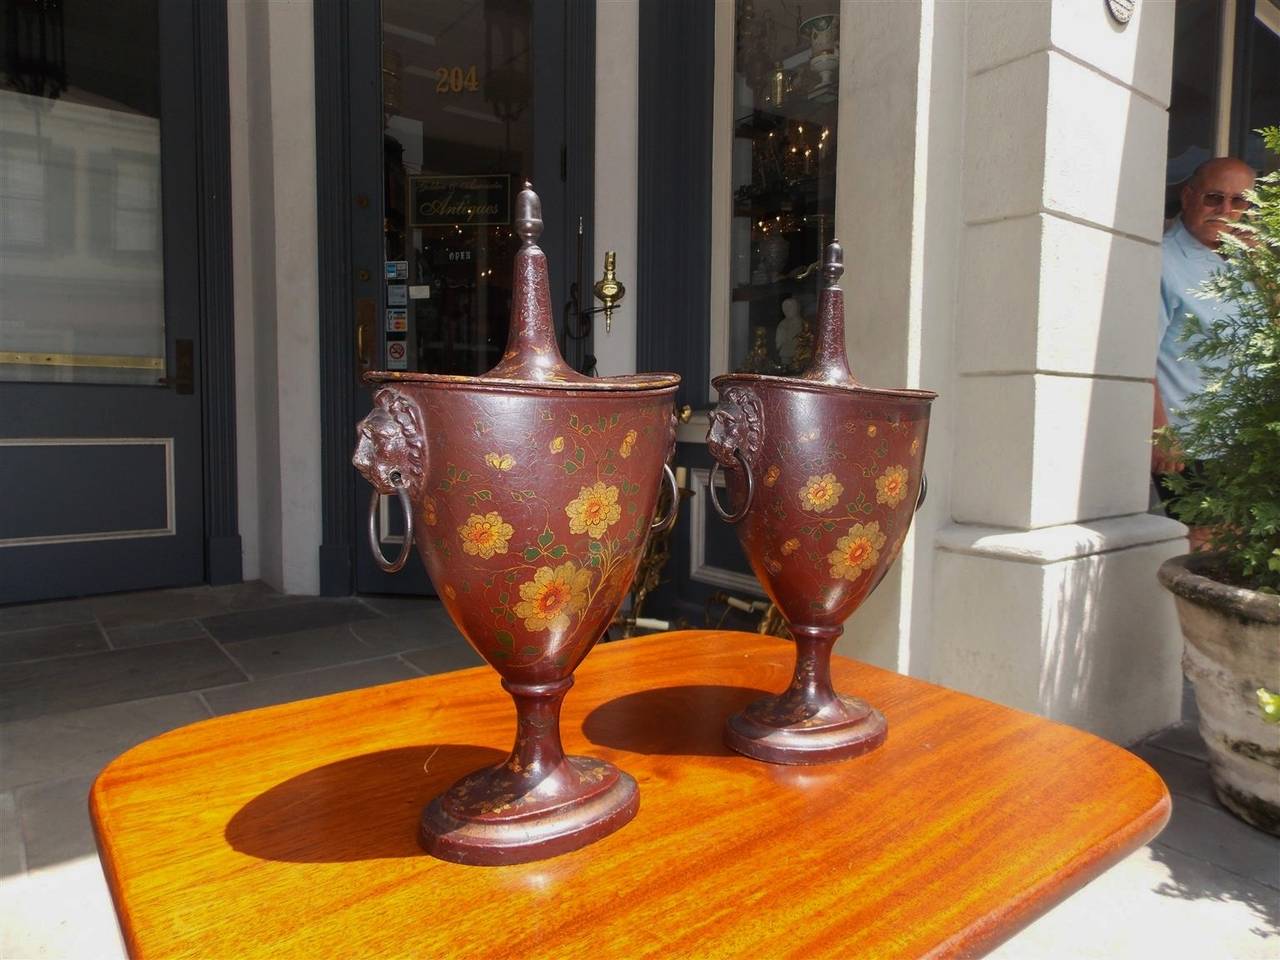 Pair of English Regency tole chestnut urns with hand-painted floral decorative motif, removable lids with acorn finials, original lions head side handles with rings and terminating on a circular molded edge plinths, Early 19th century.